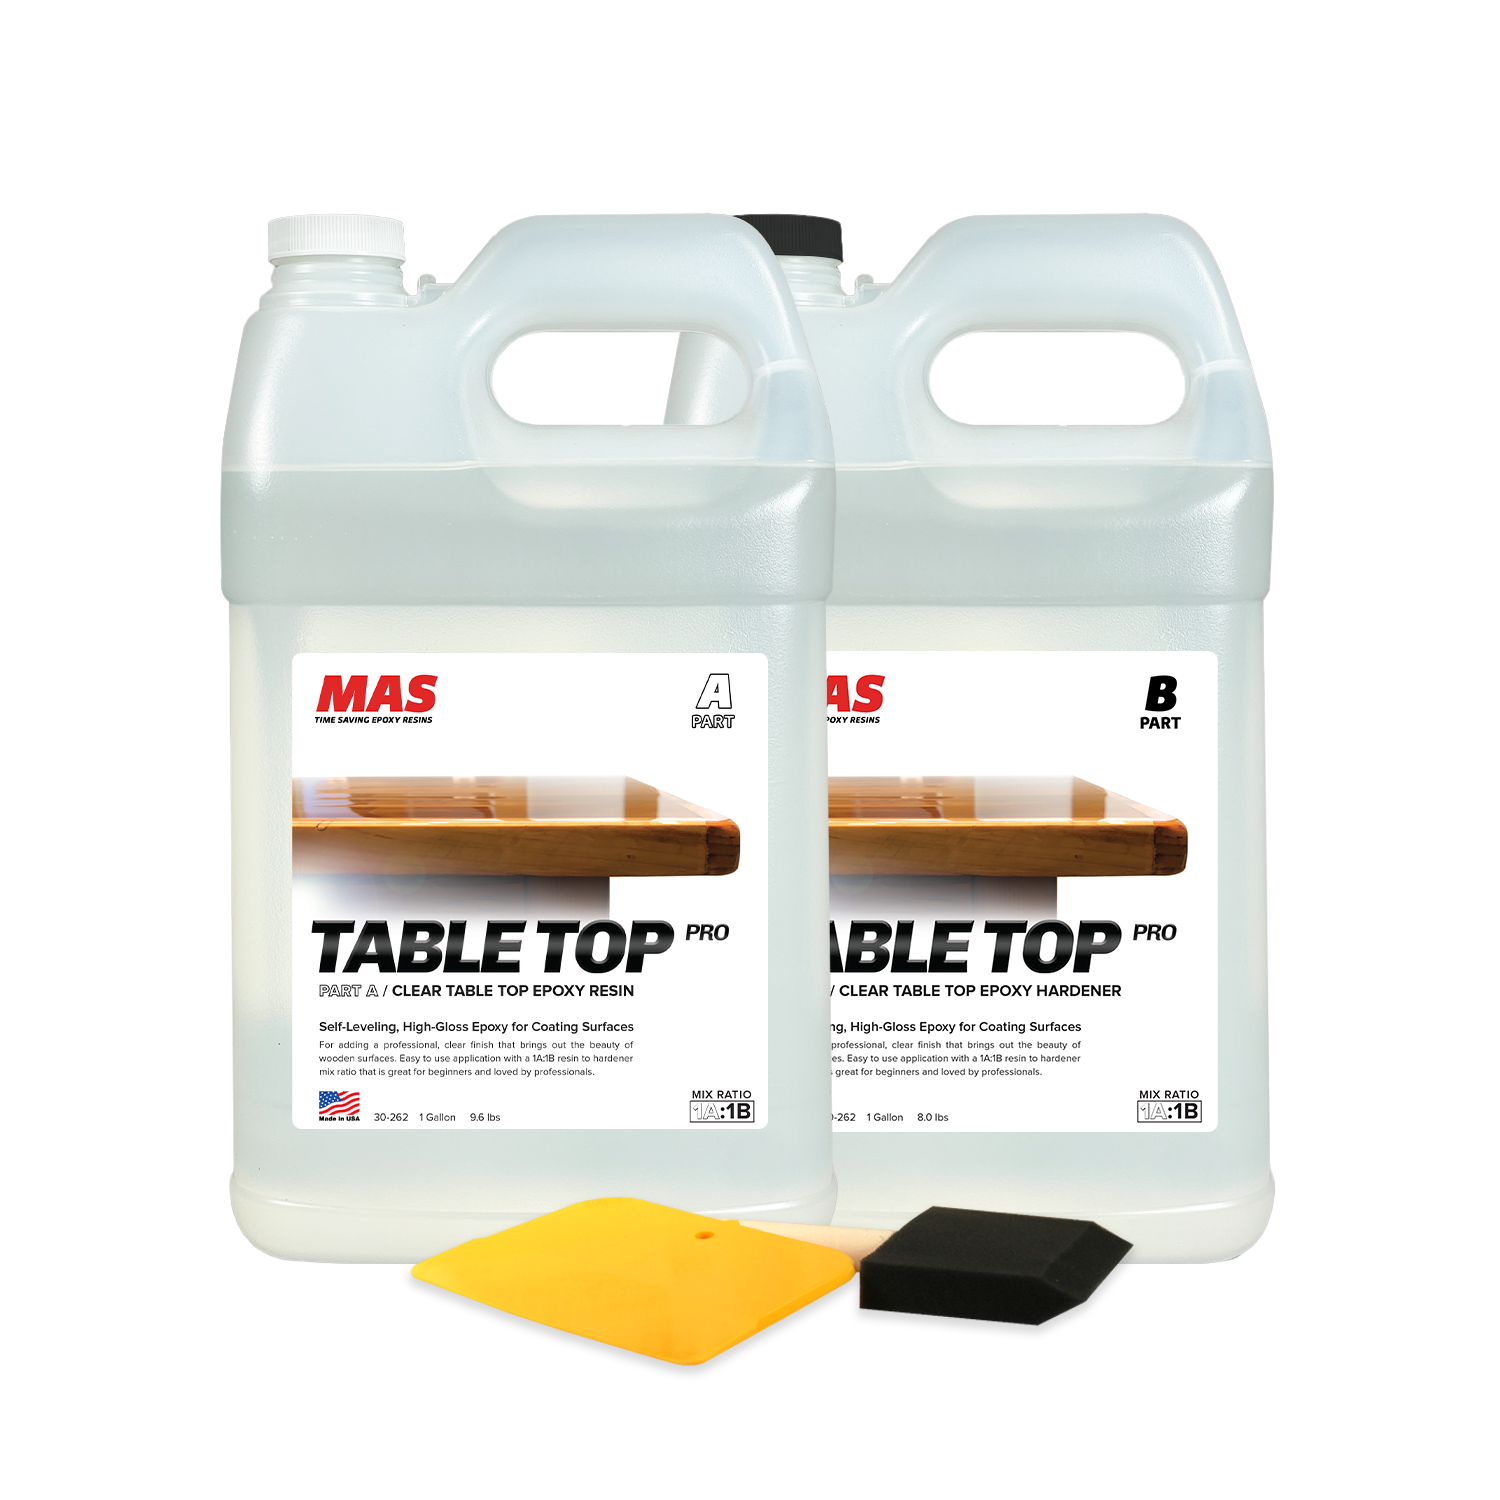 Can I use the table top epoxy for filling small cracks and voids with color before sealing and flood coating?